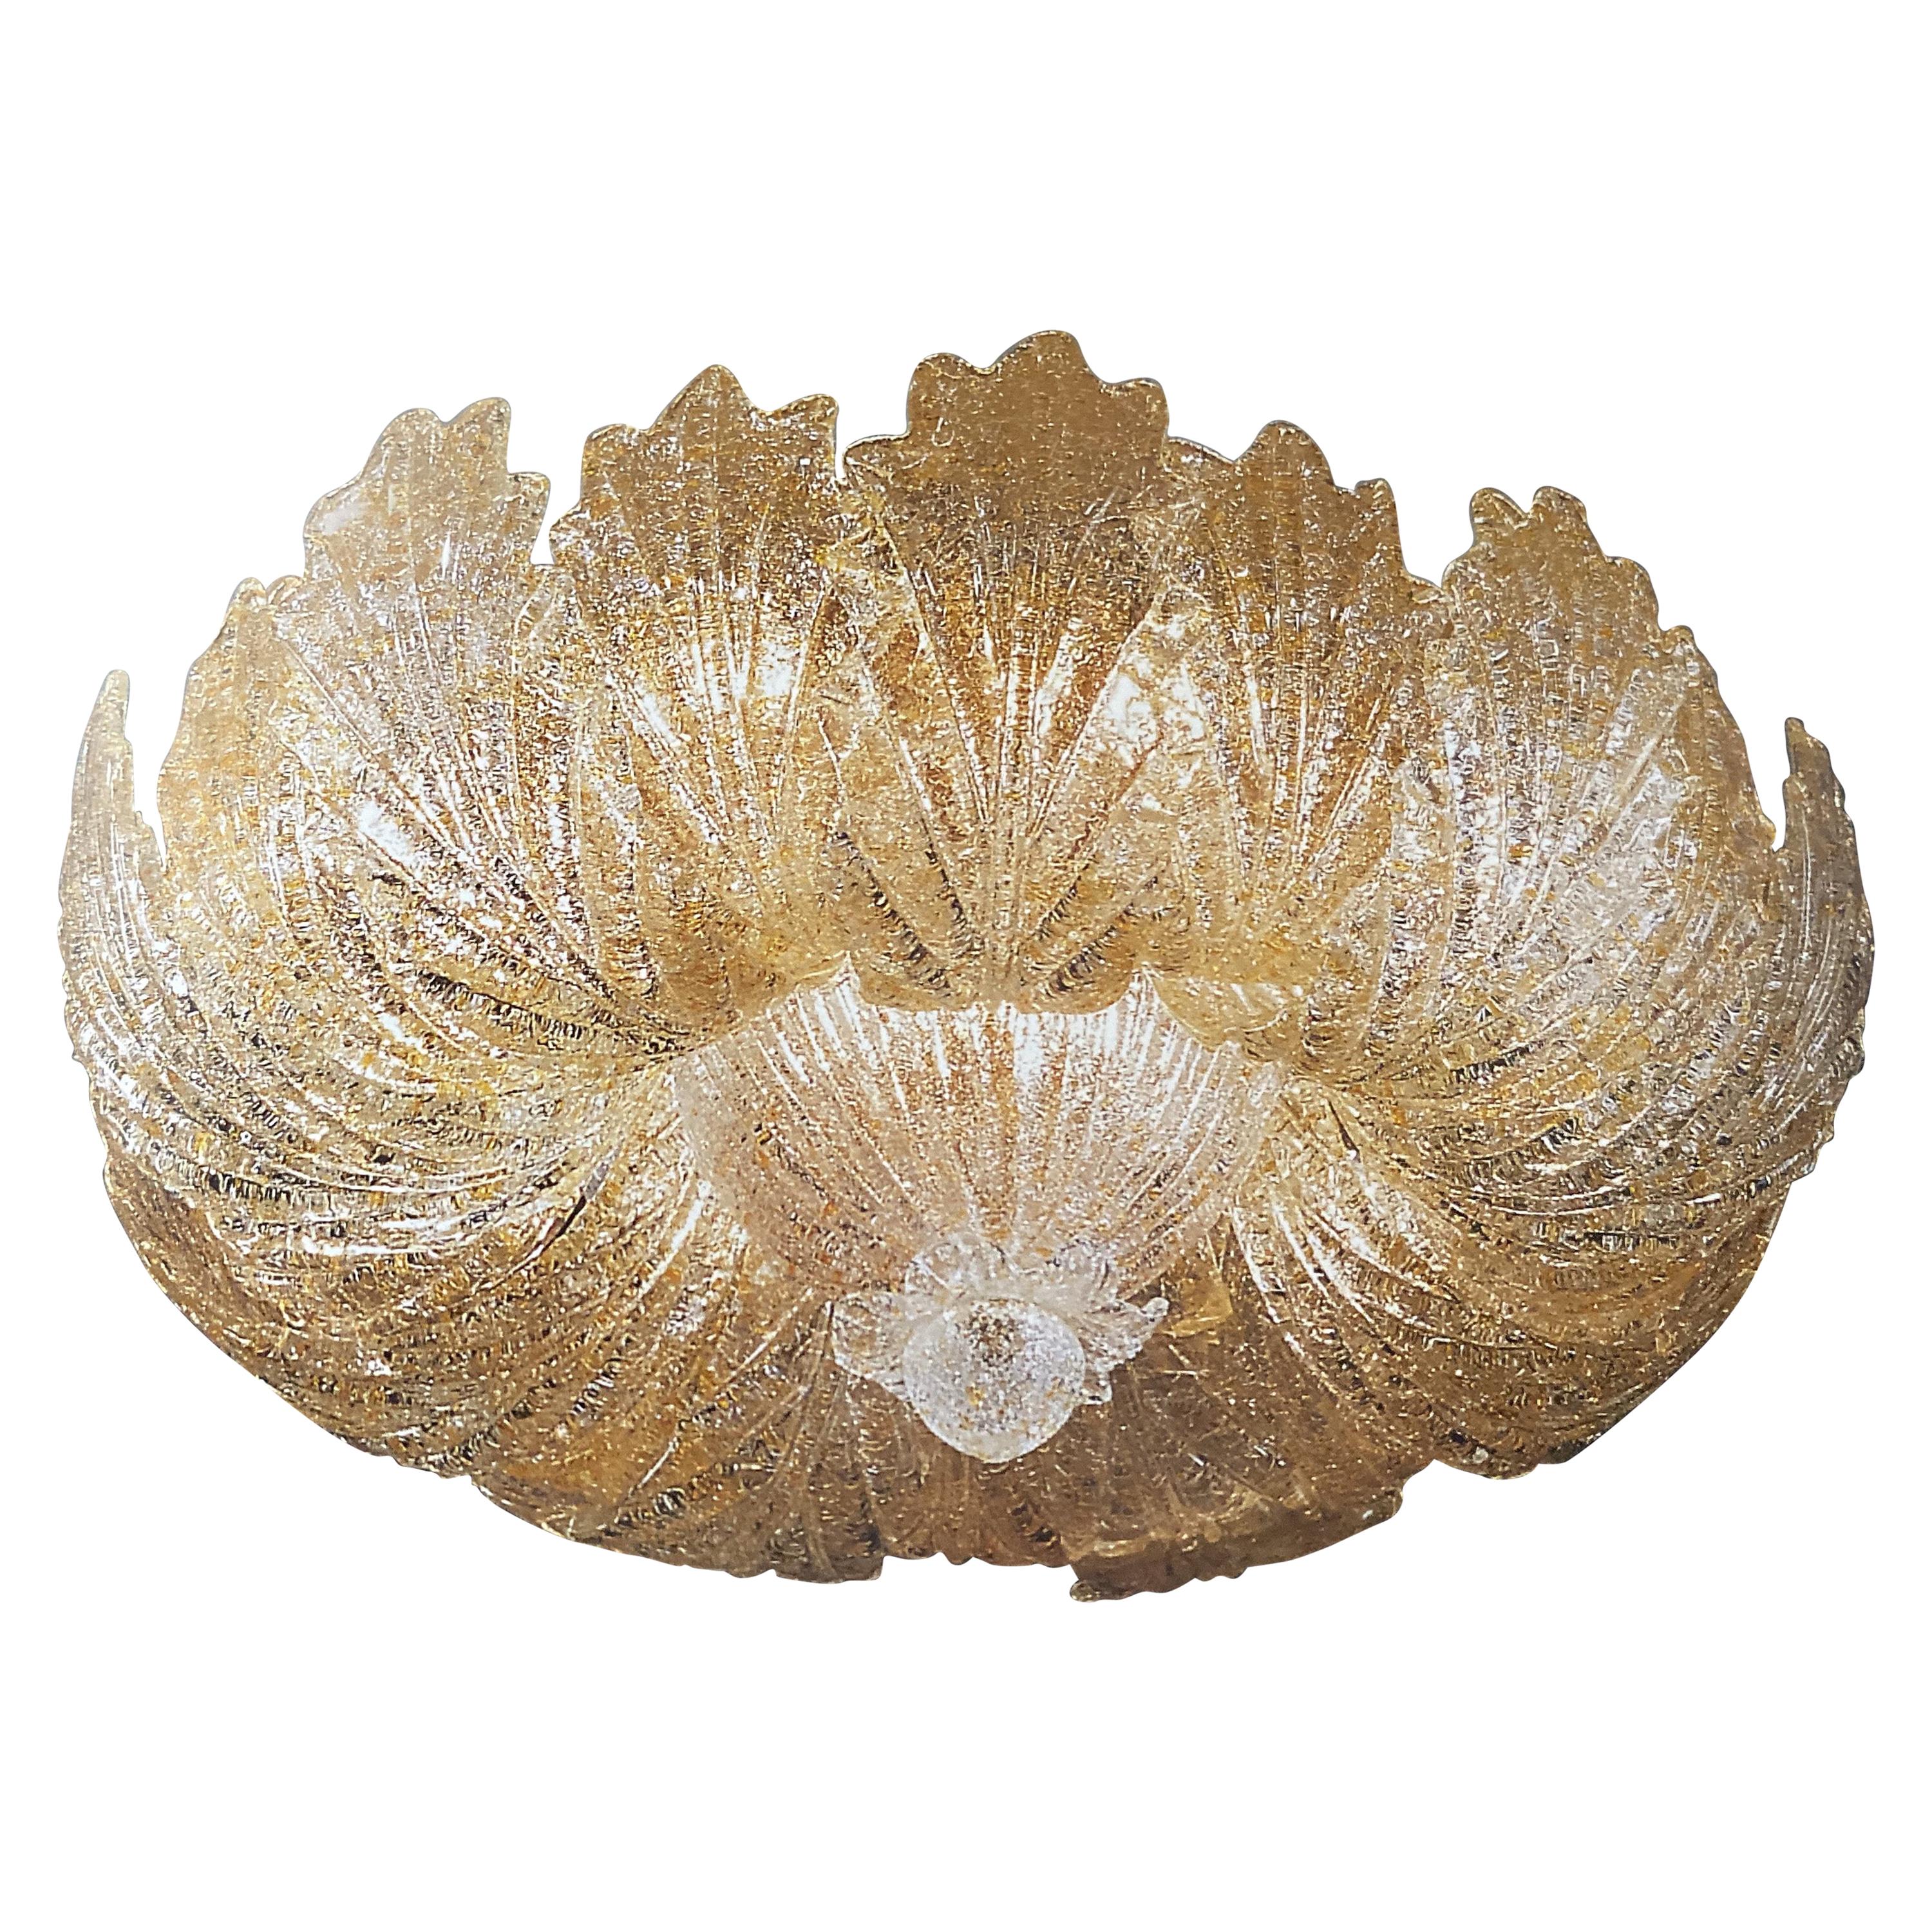 This ceiling light realized in pure Murano glass leaves with gold intrusion. Available also with clear graniglia leaves.
Amazing 24-carat gold-plated structure and canopy.
This beautiful ceiling light gives an elegant Ambience a special flair and